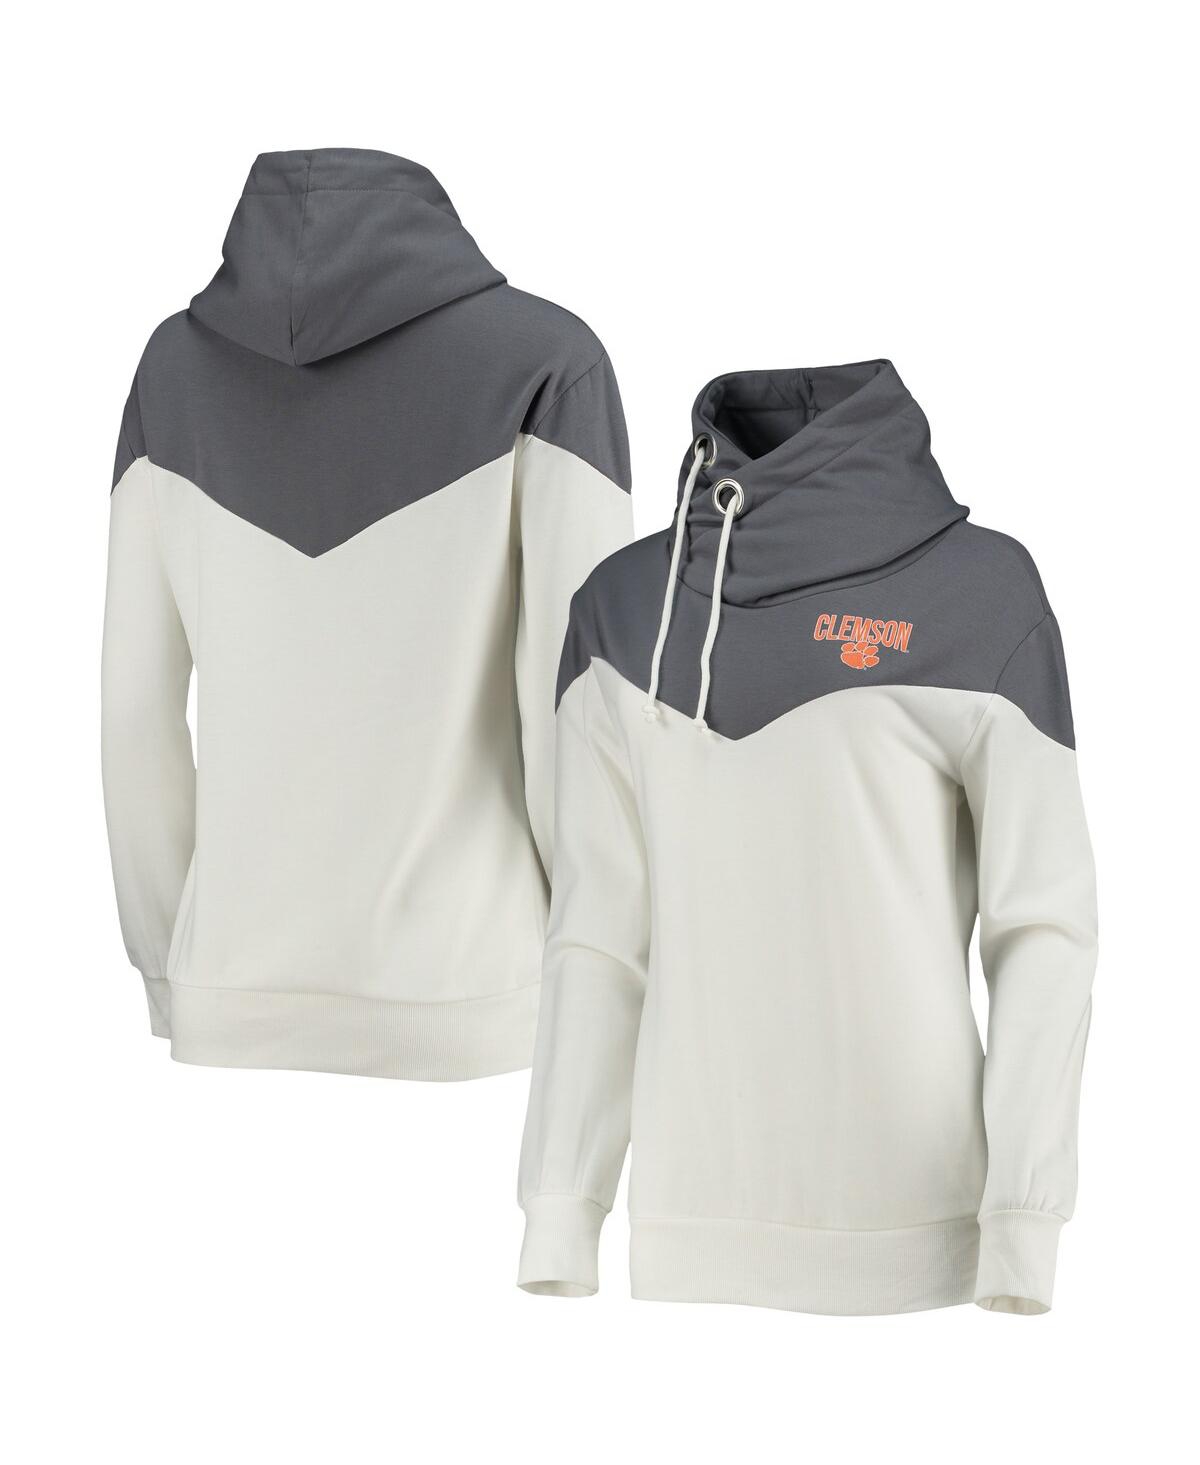 Women's Gameday Couture White, Gray Clemson Tigers Old School Arrow Blocked Cowl Neck Tri-Blend Pullover Hoodie - White, Gray